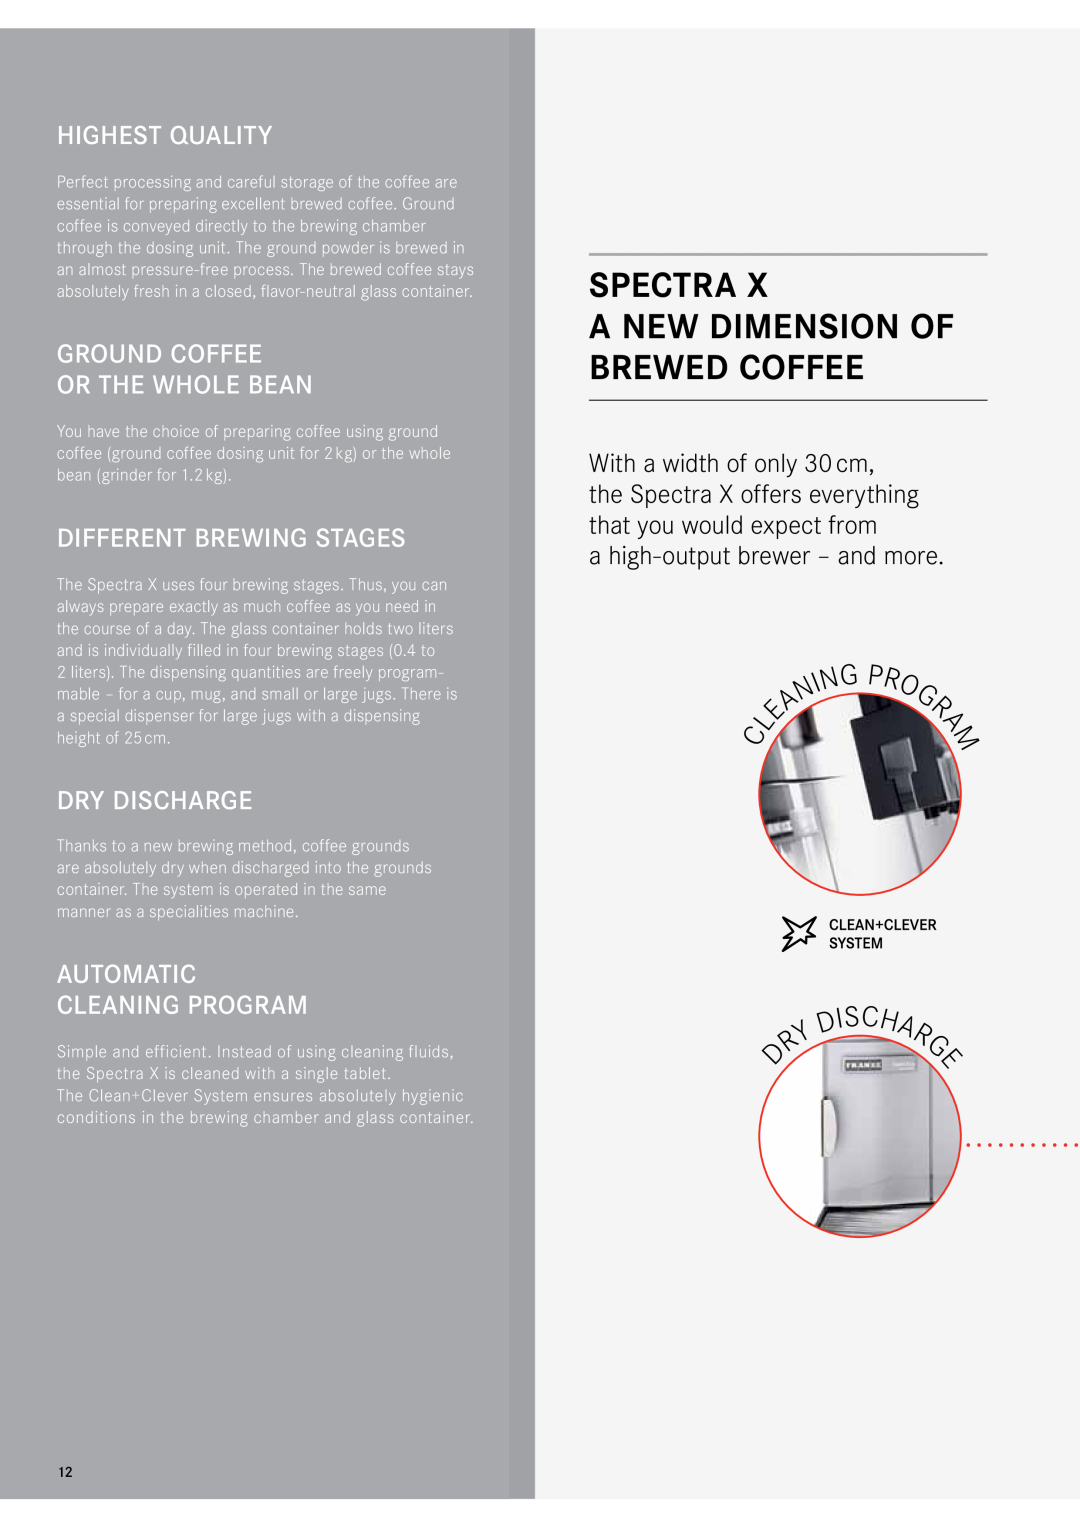 Franke Consumer Products 471086A1 Spectra a new dimension of brewed coffee, Highest Quality, Different brewing stages 